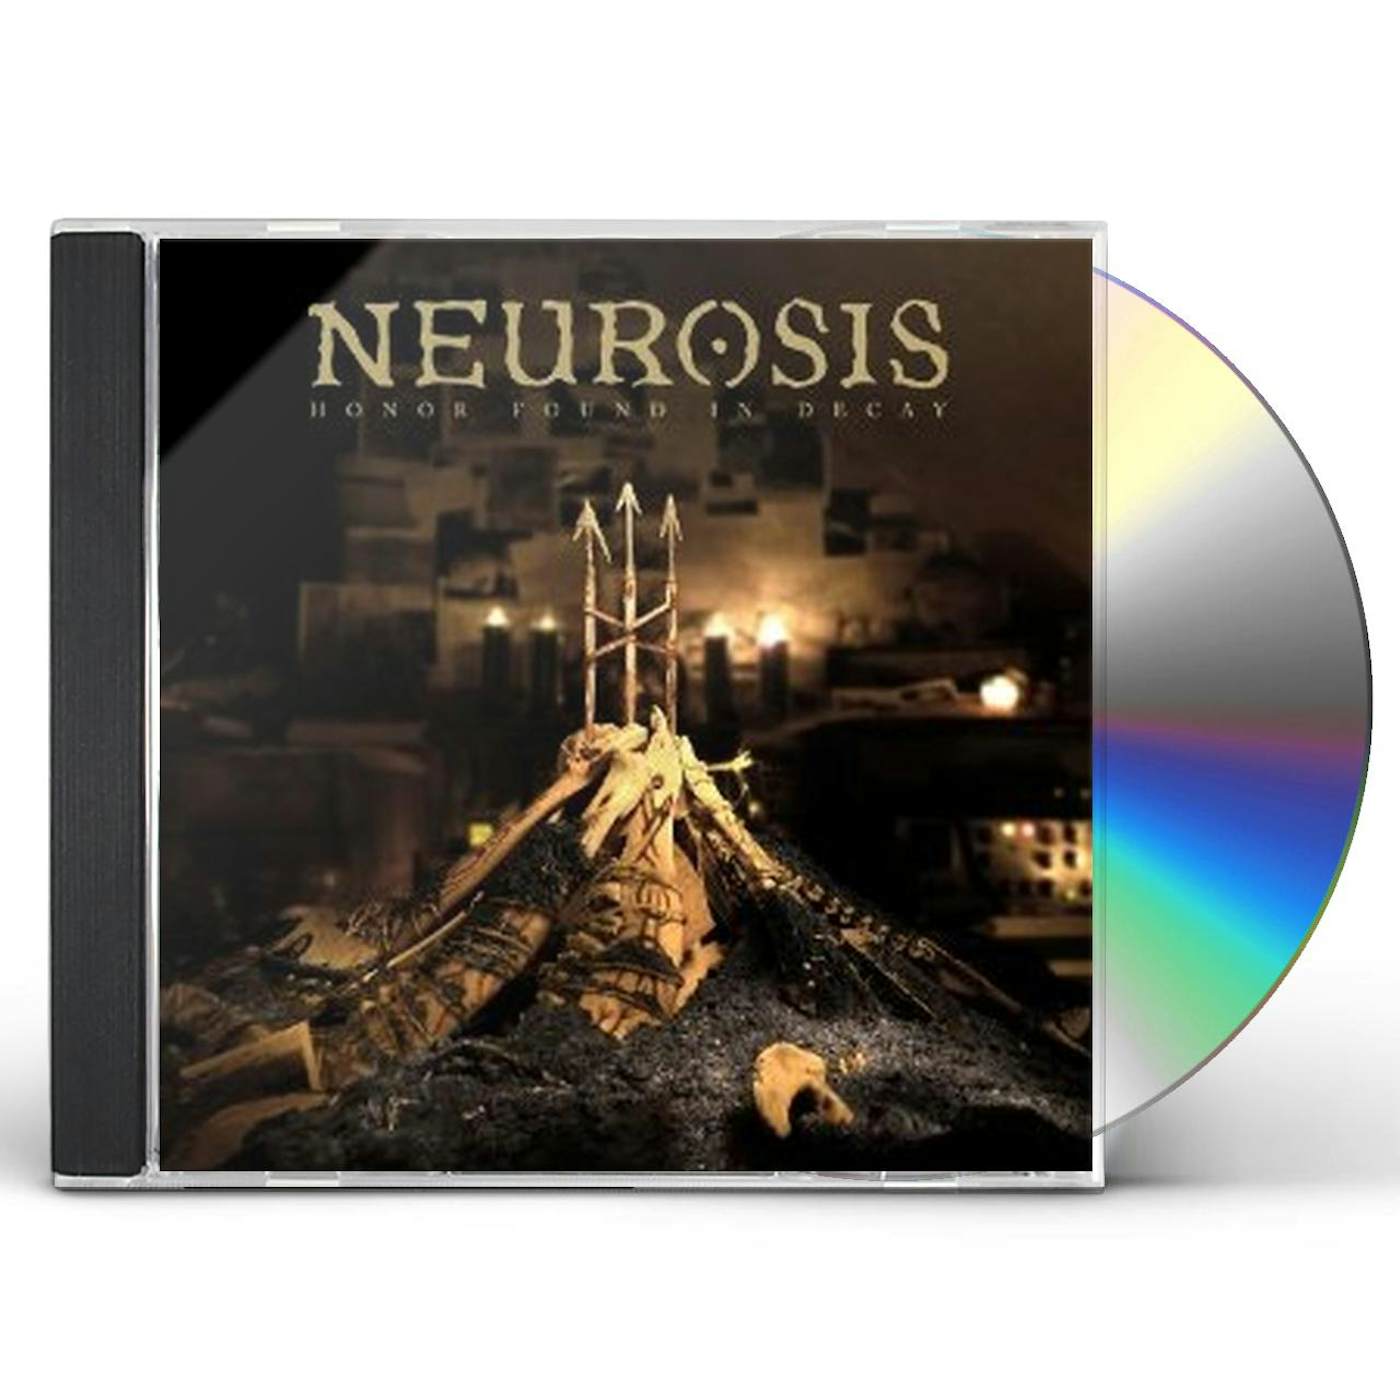 Neurosis HONOR FOUND IN DECAY CD